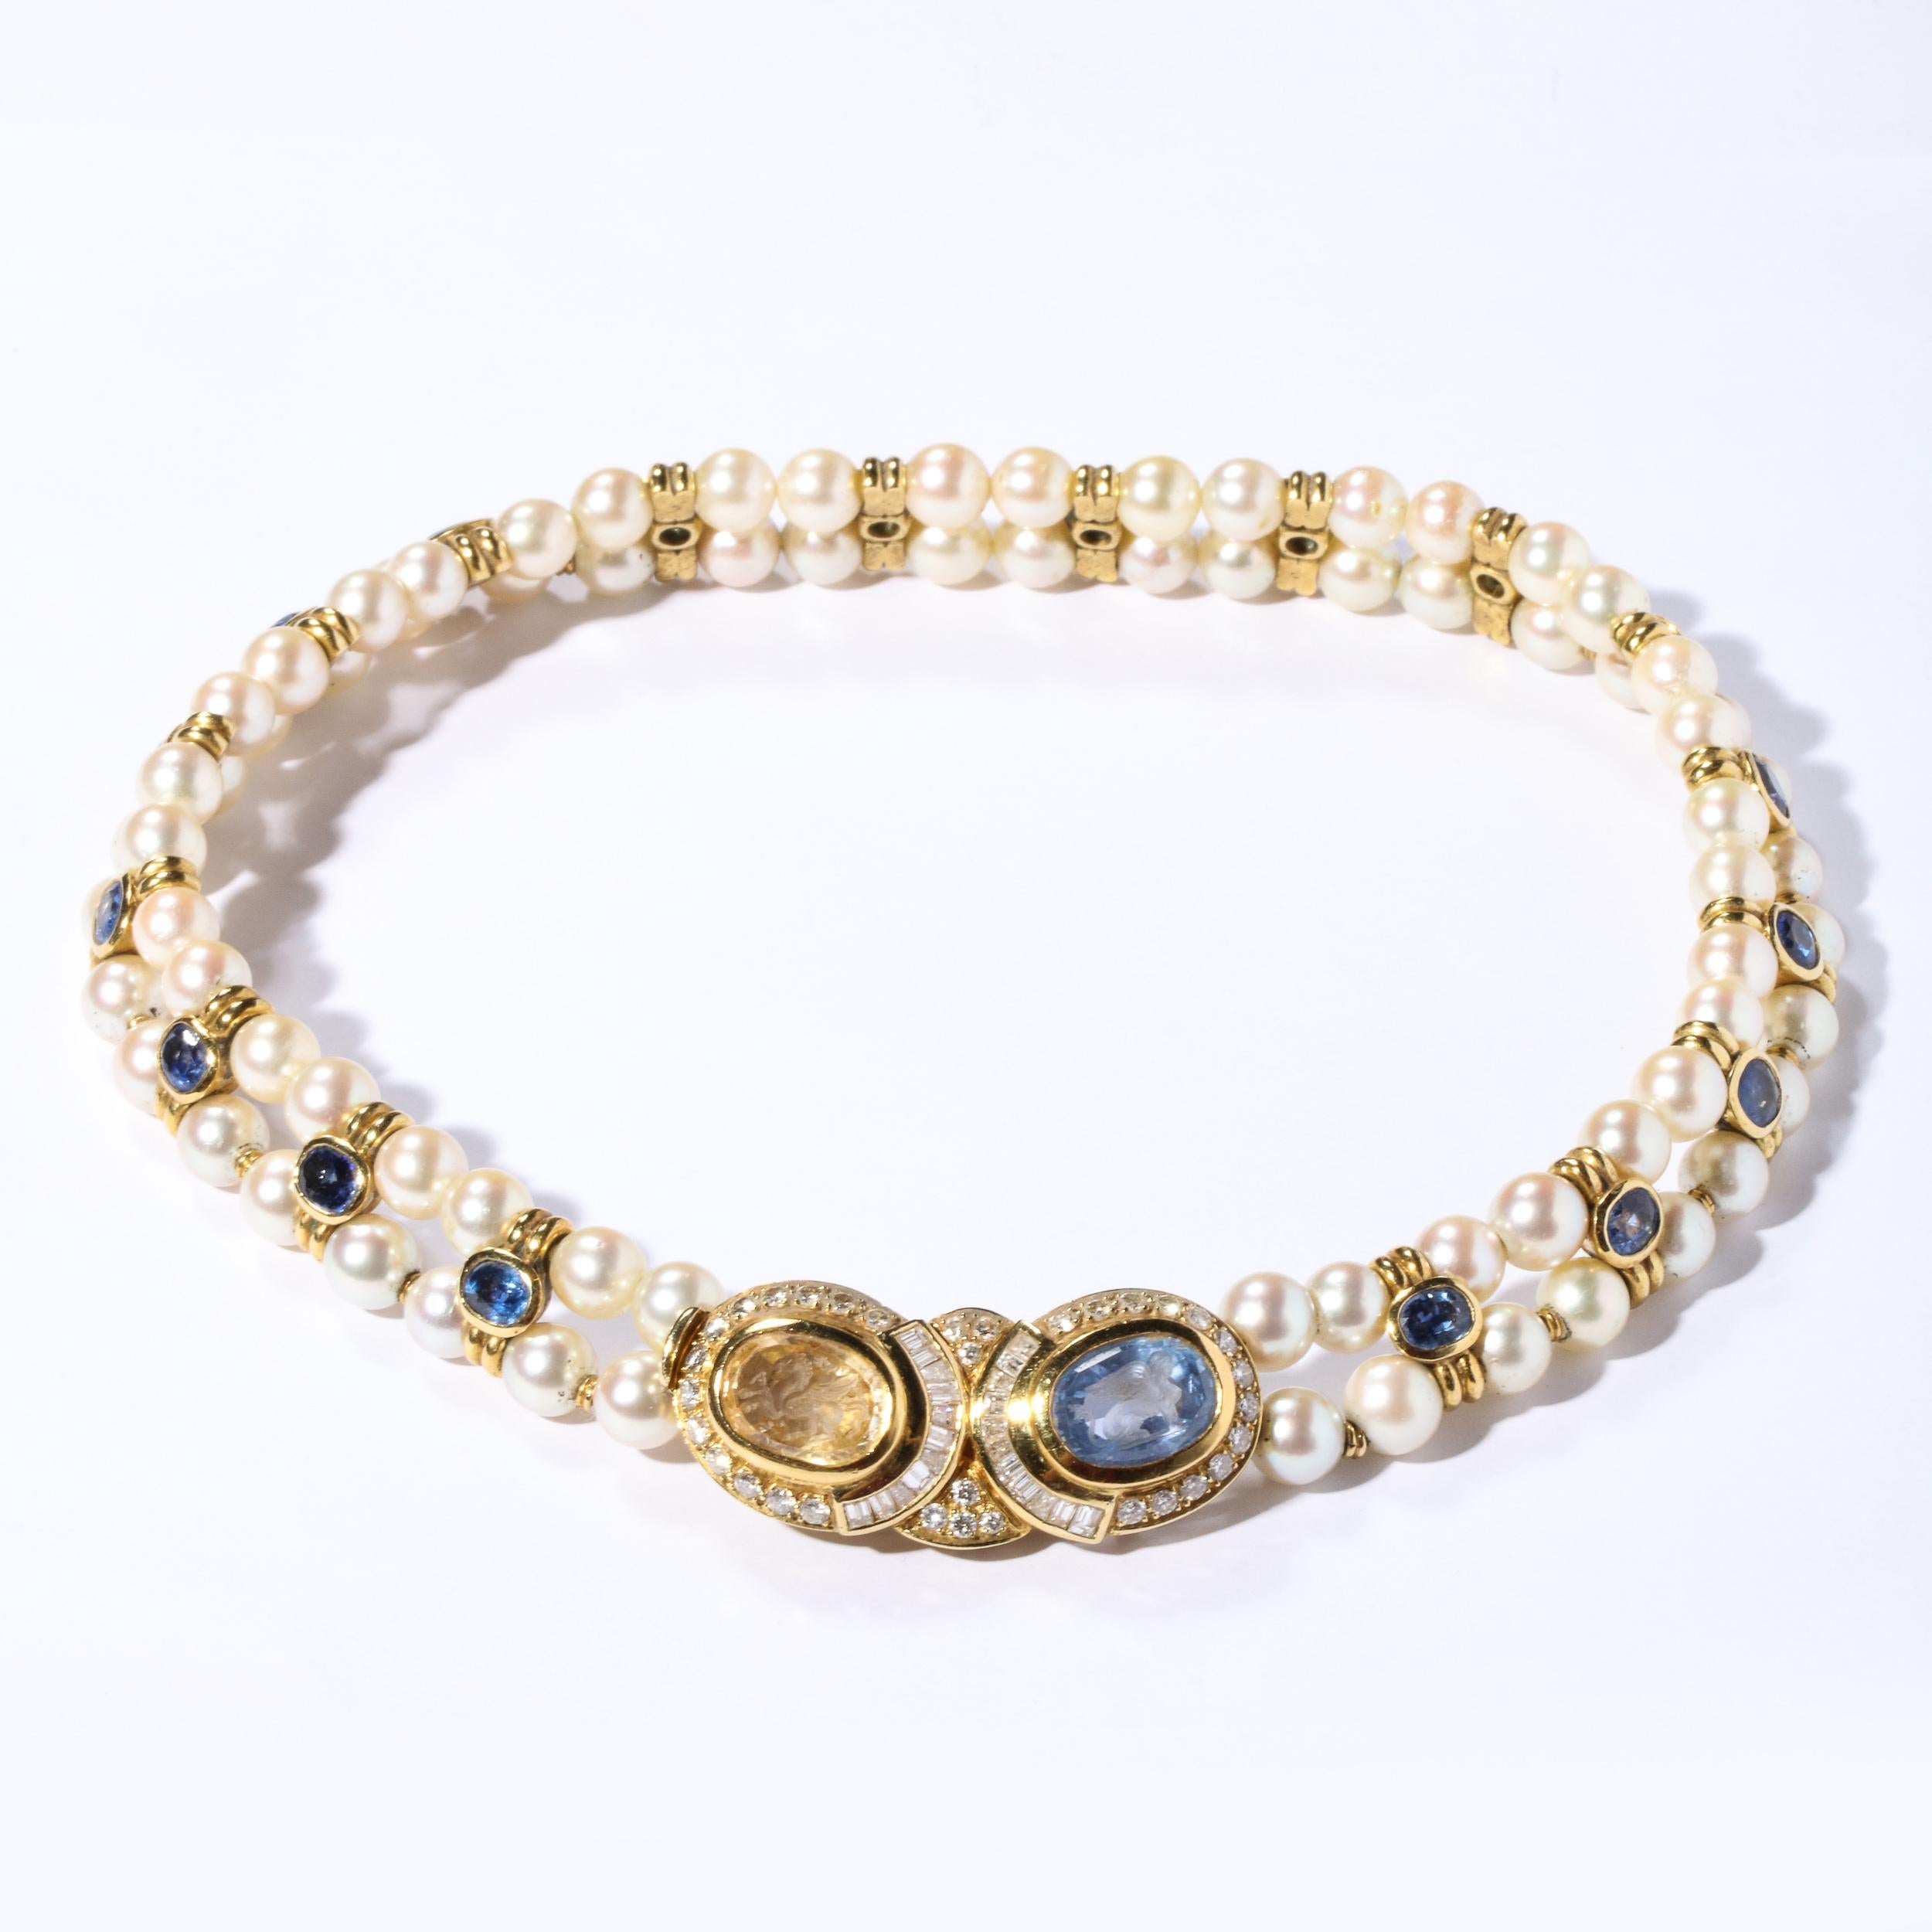 These stunning Double strand pearls are comprised of 76 fine quality pearls approximately 7 mm each with 18 spacers of 18k gold set with oval shaped iolite stones bezel satin 18k. The center clasp is set with a oval citrine and iolite both carved